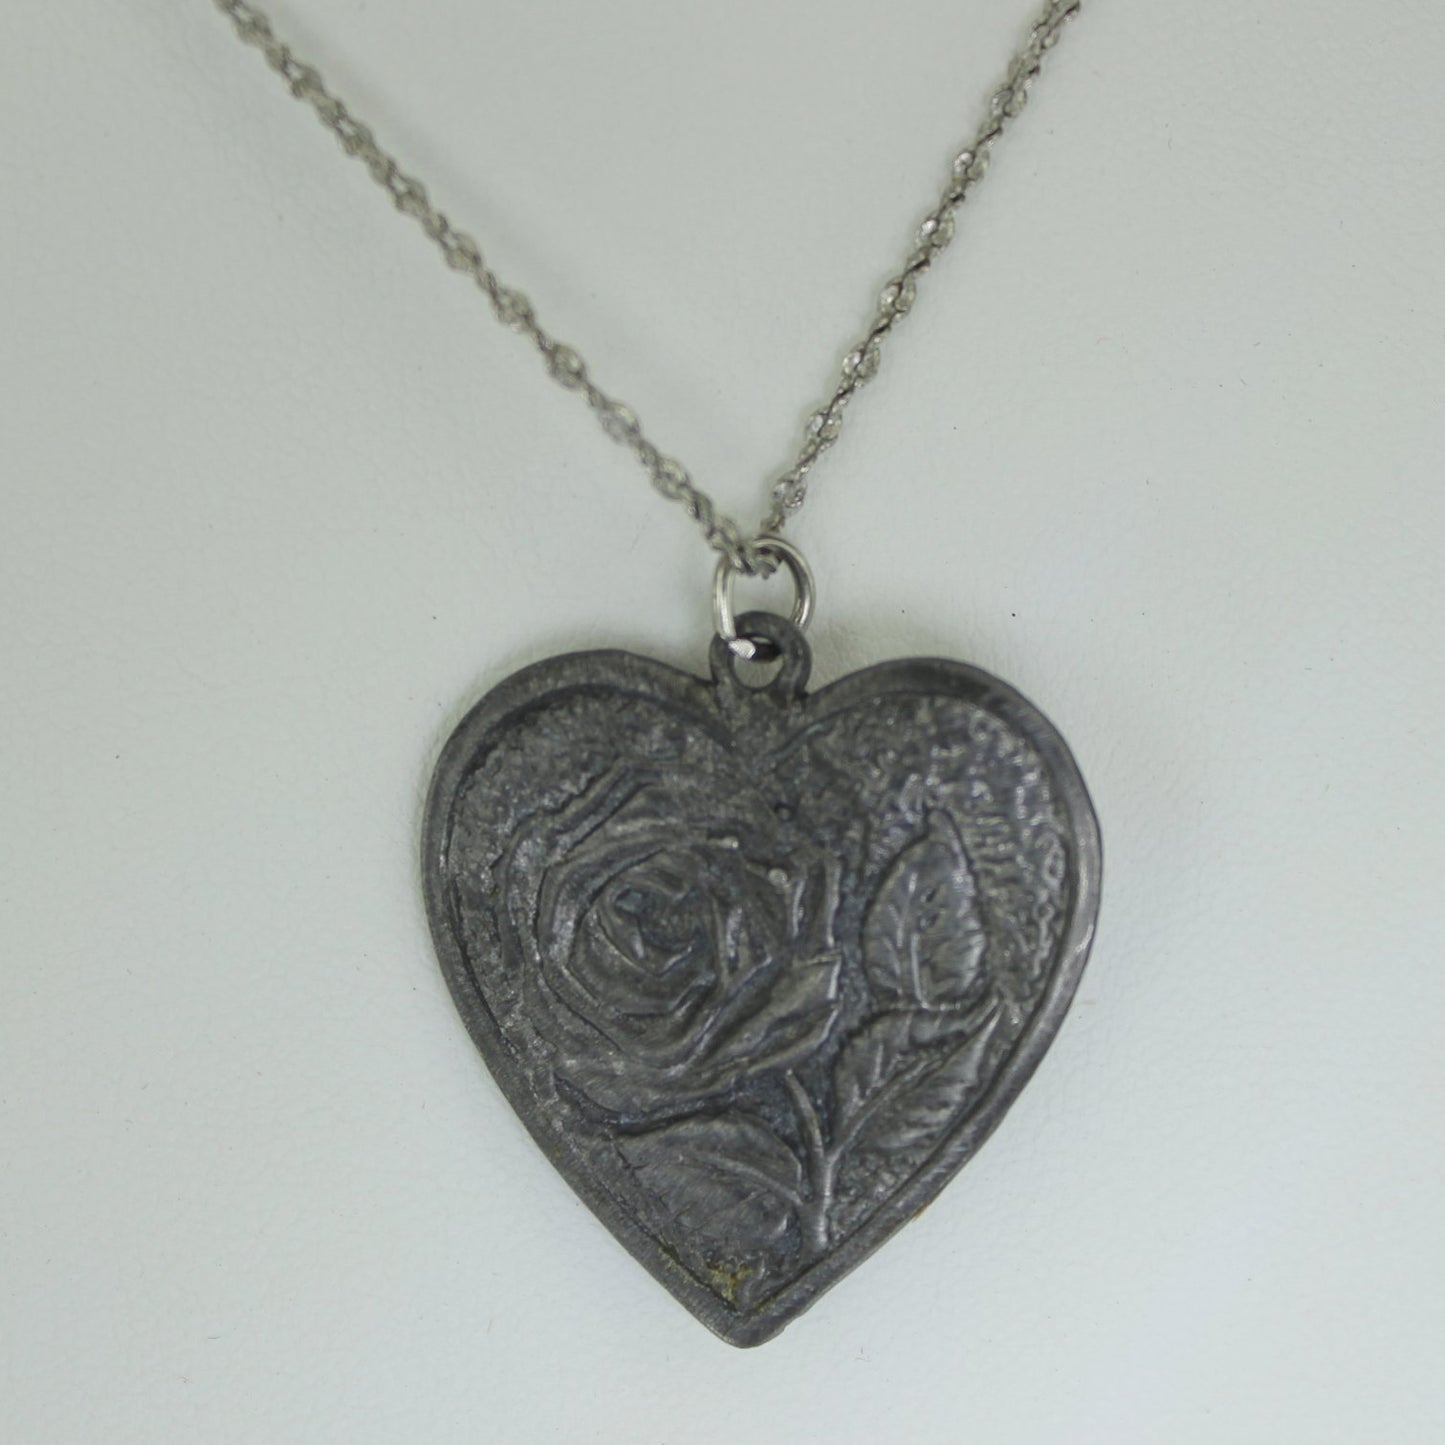 Heart Pewter Necklace 1905 Indian Head Penny Cent  reverse of pendant